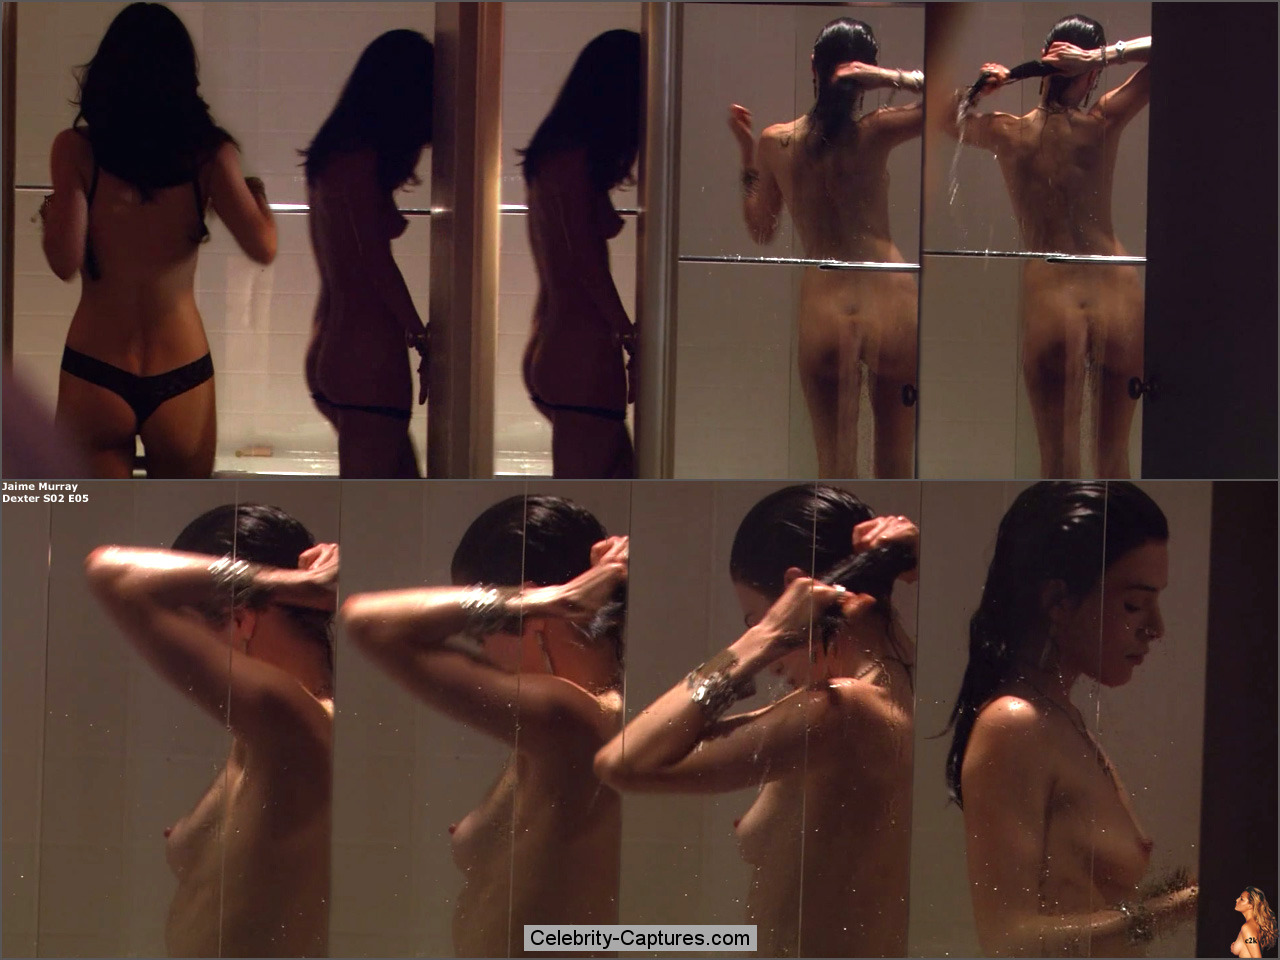 chris creech recommends jaime murray nude pic